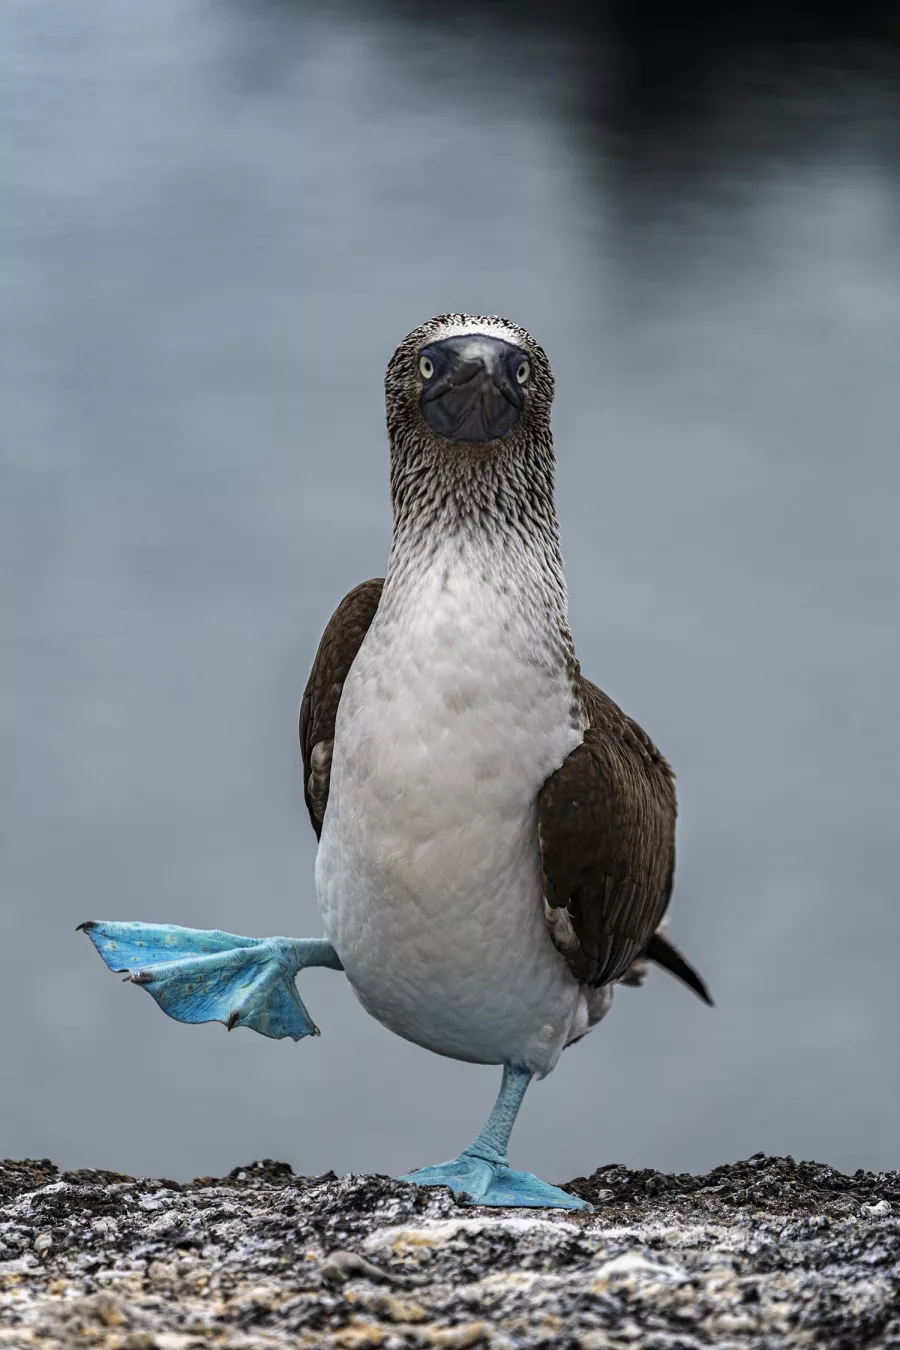 A booby with one foot in the air, as if caught in the middle of a dance